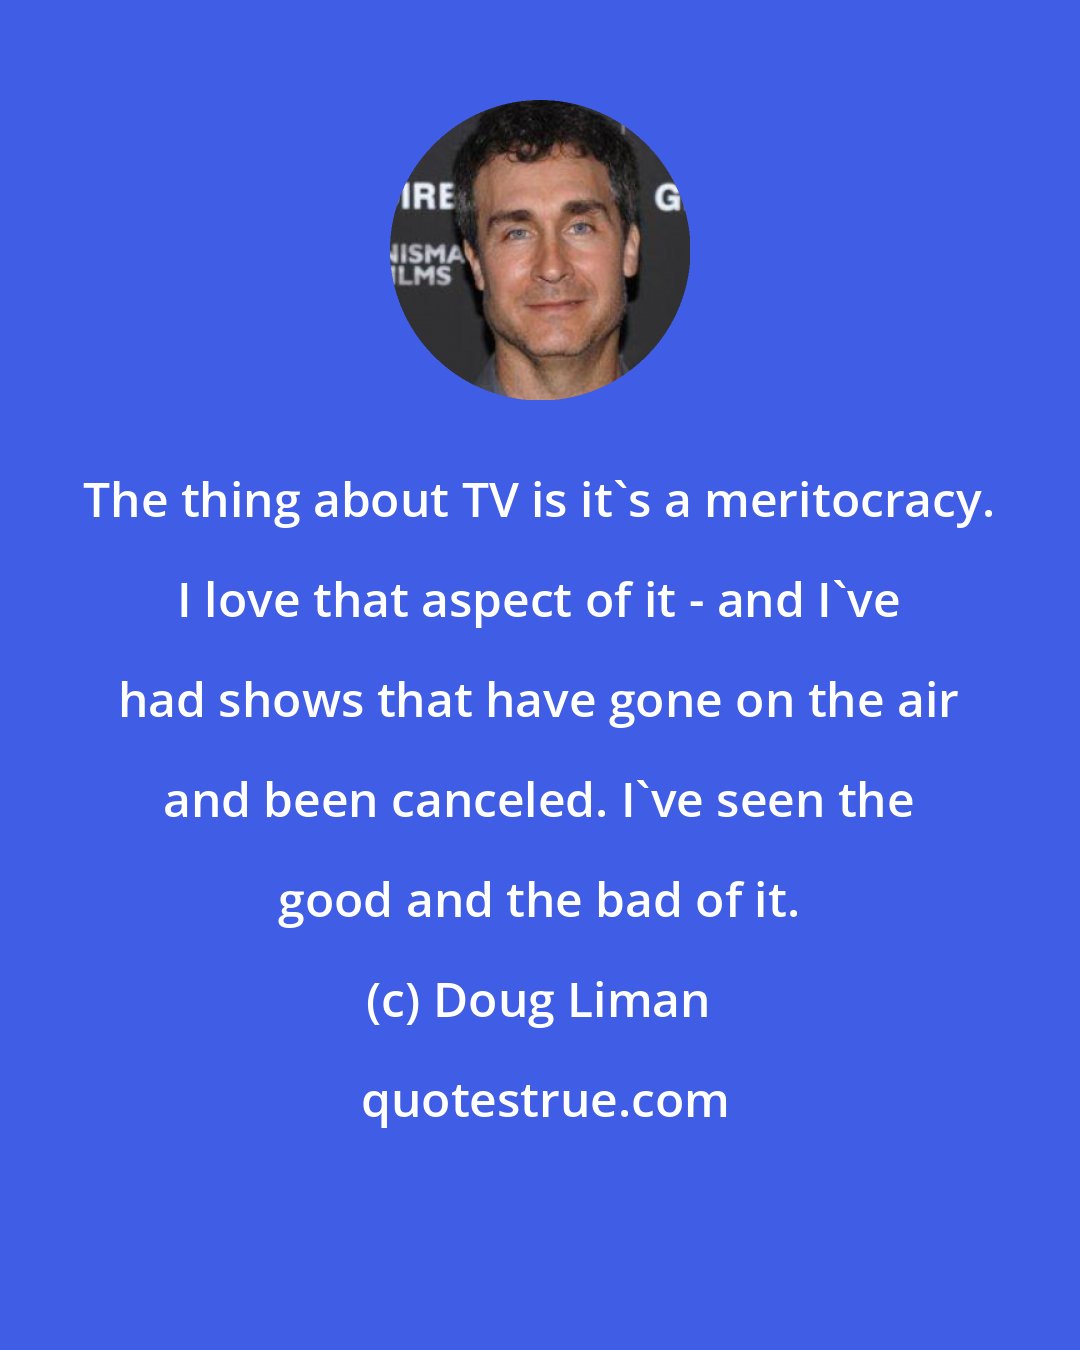 Doug Liman: The thing about TV is it's a meritocracy. I love that aspect of it - and I've had shows that have gone on the air and been canceled. I've seen the good and the bad of it.